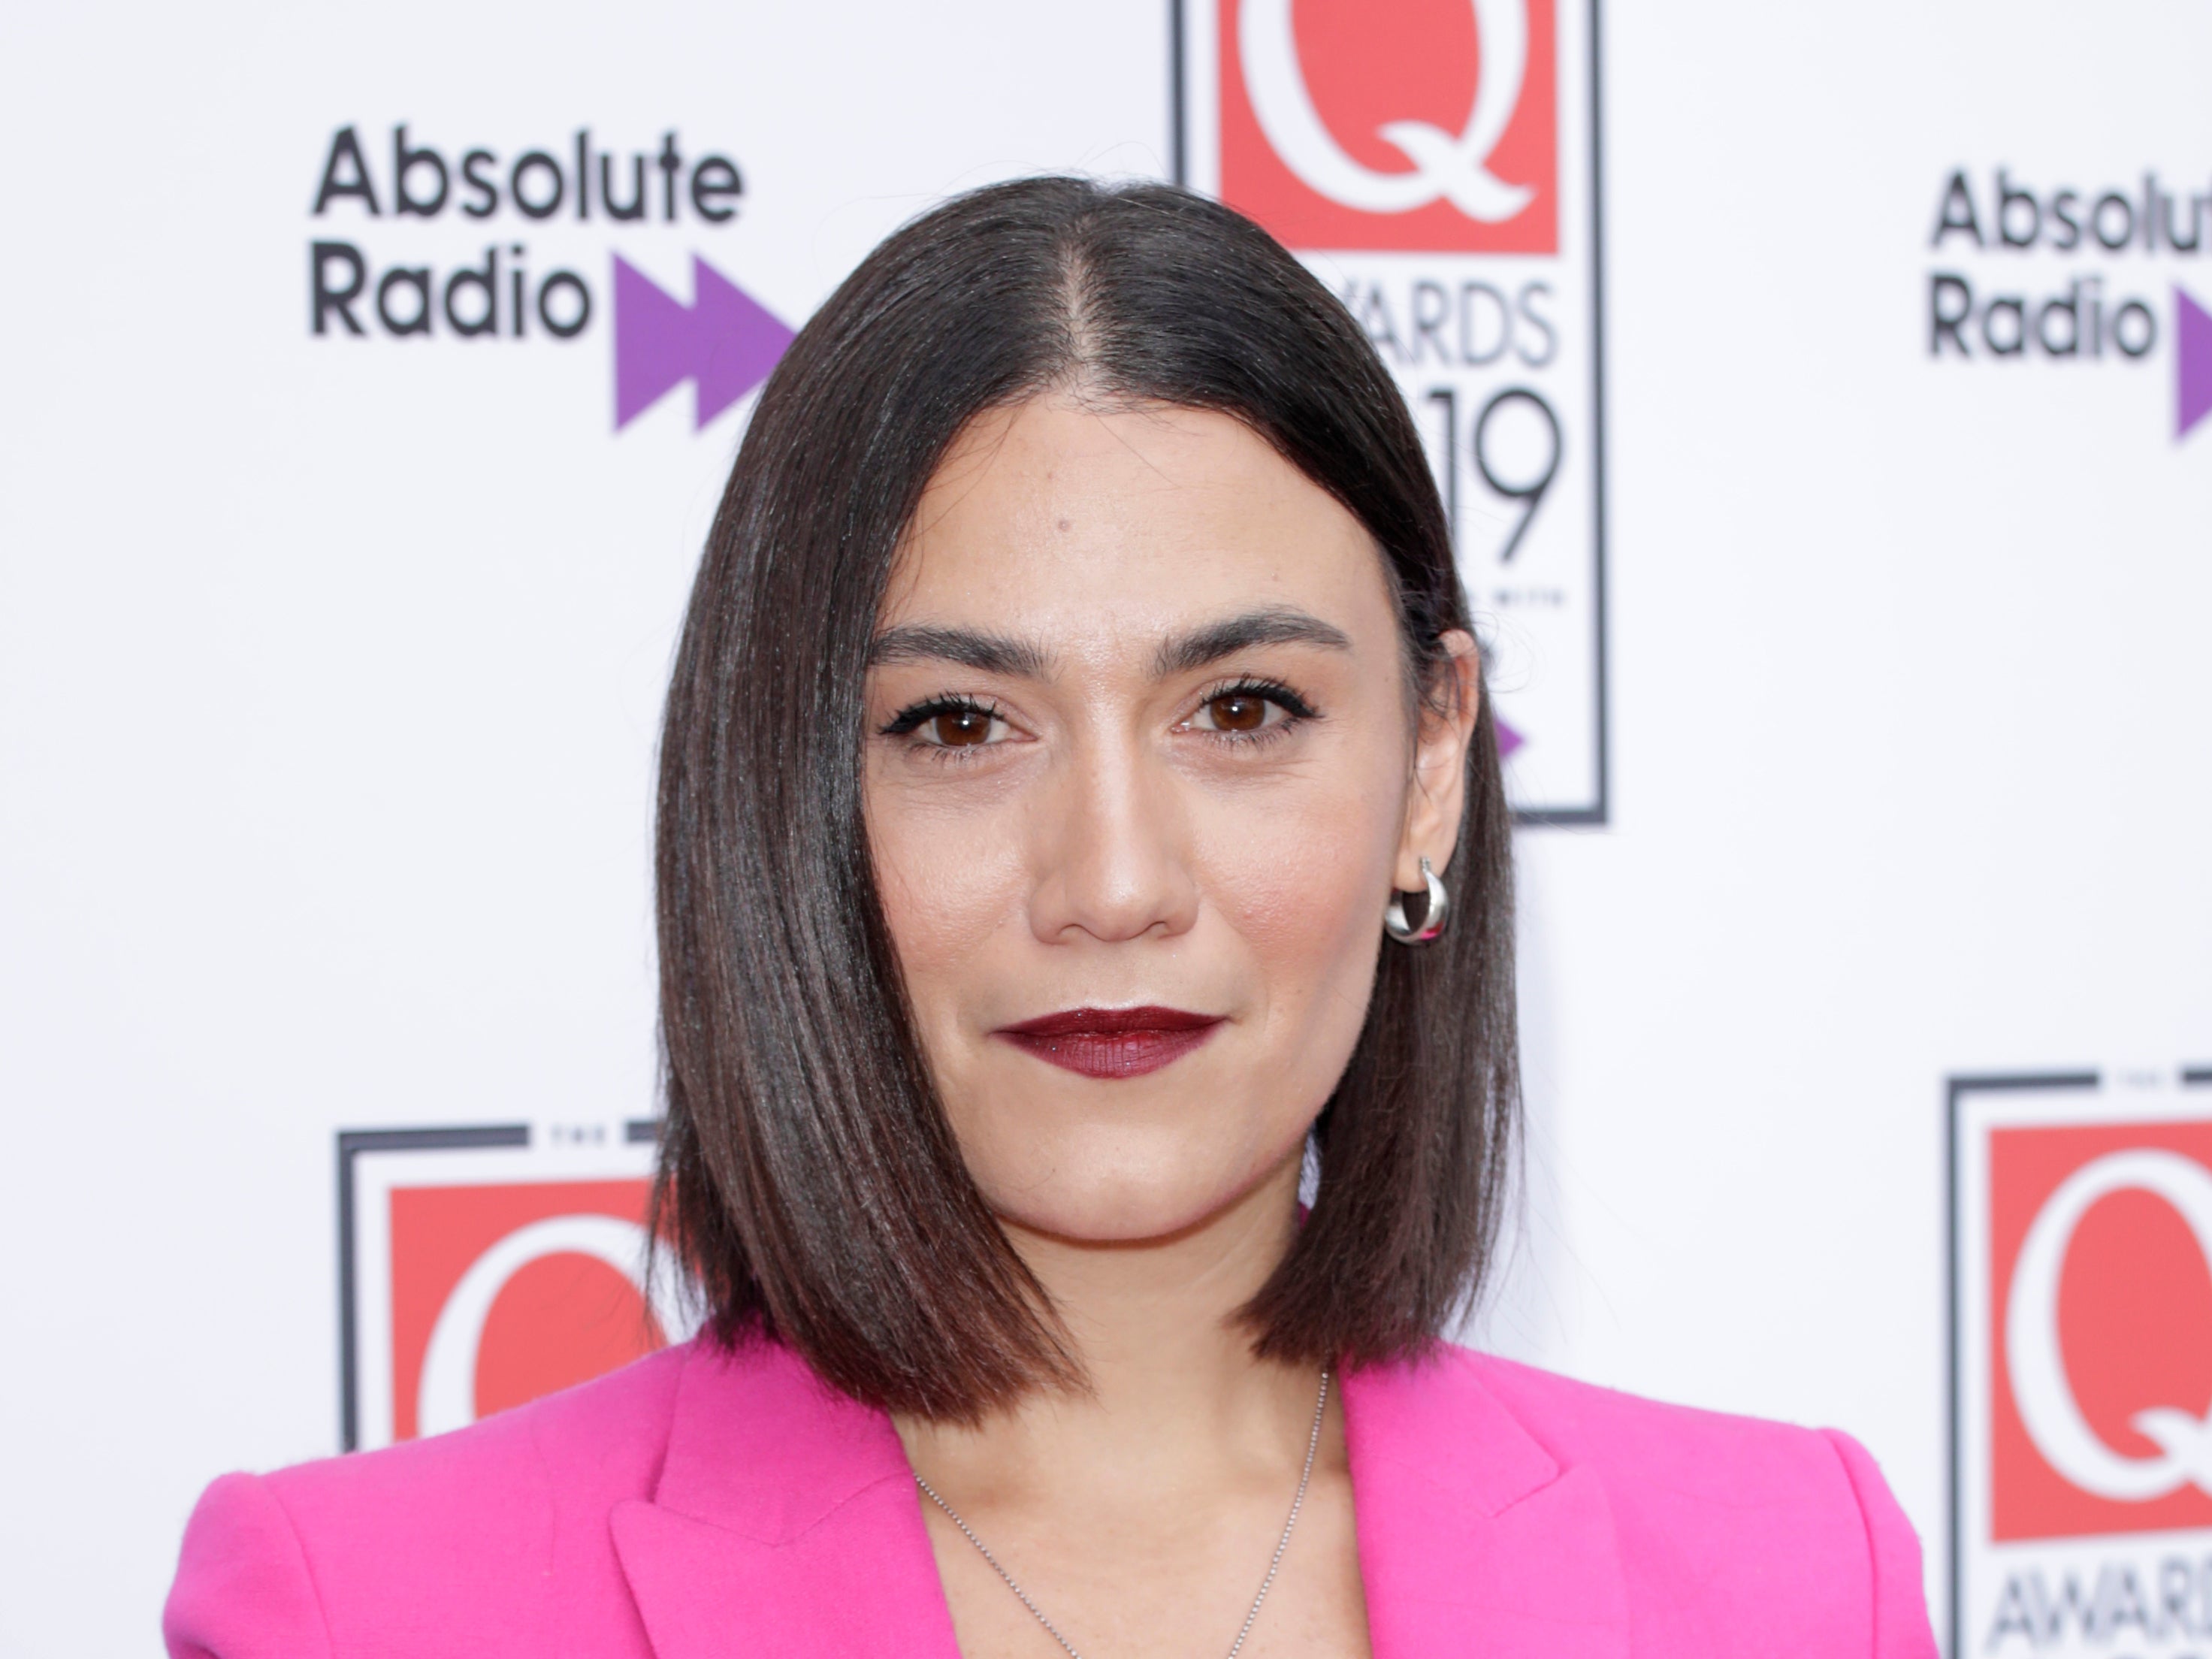 Nadine Shah pictured at the Q Awards in 2019